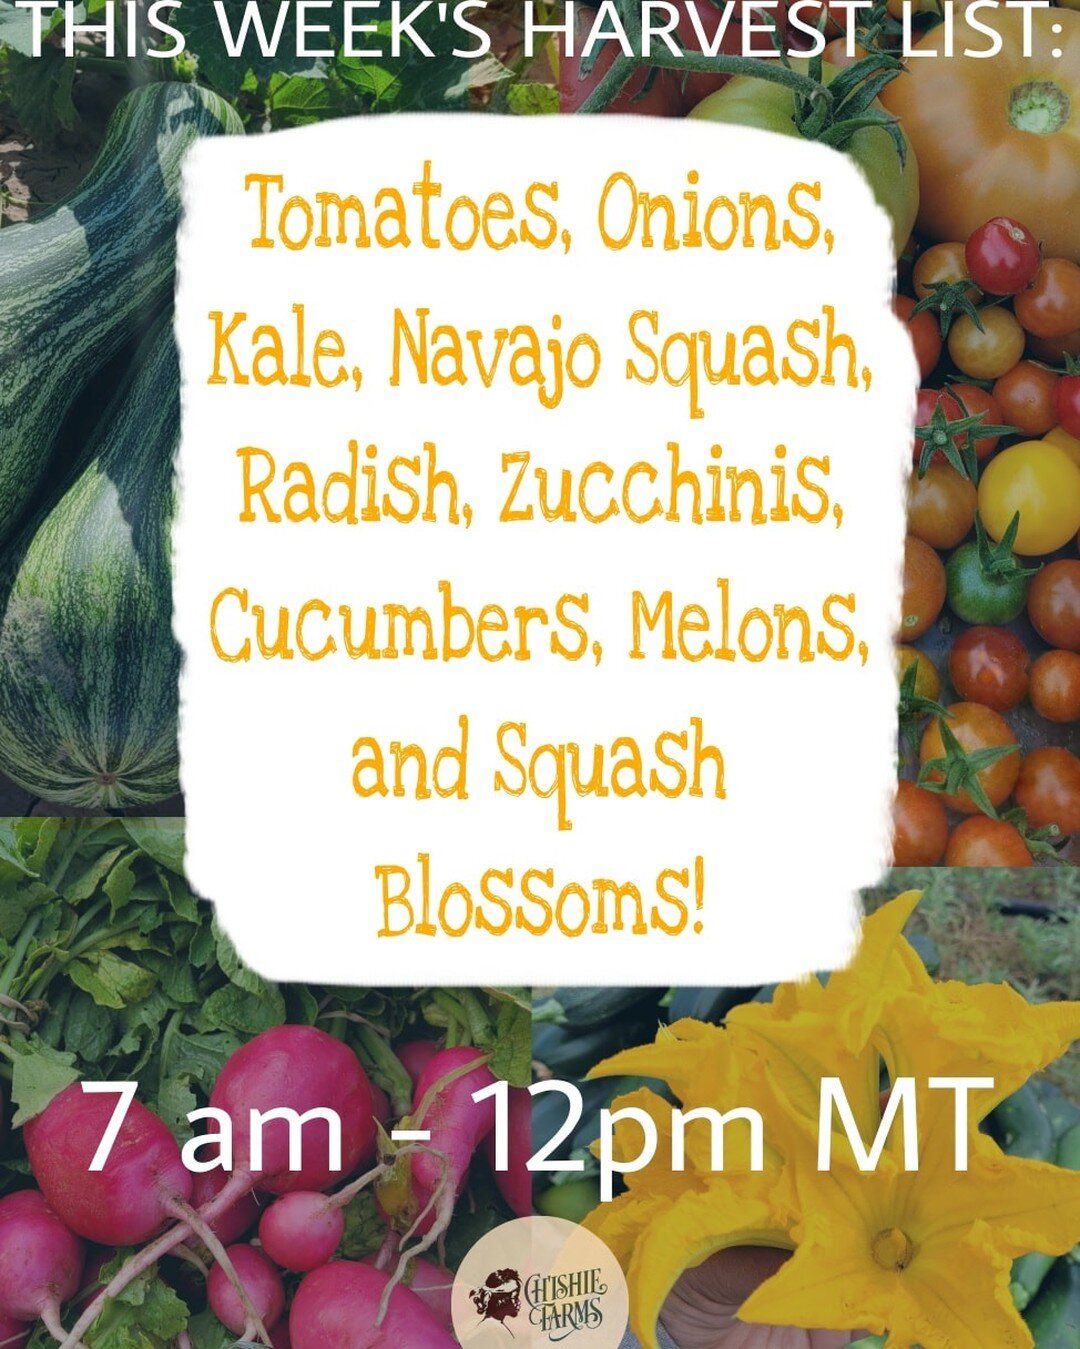 Good morning from Chishie farms! Today we will have these produces on the table at the farmers market, City Hall parking lot. Come on by &amp; get your weekly veggies. 👍🙂
#chishiefarms #harvest2022 #vegtables #navajogrown #farmersmarket #flagstaffa